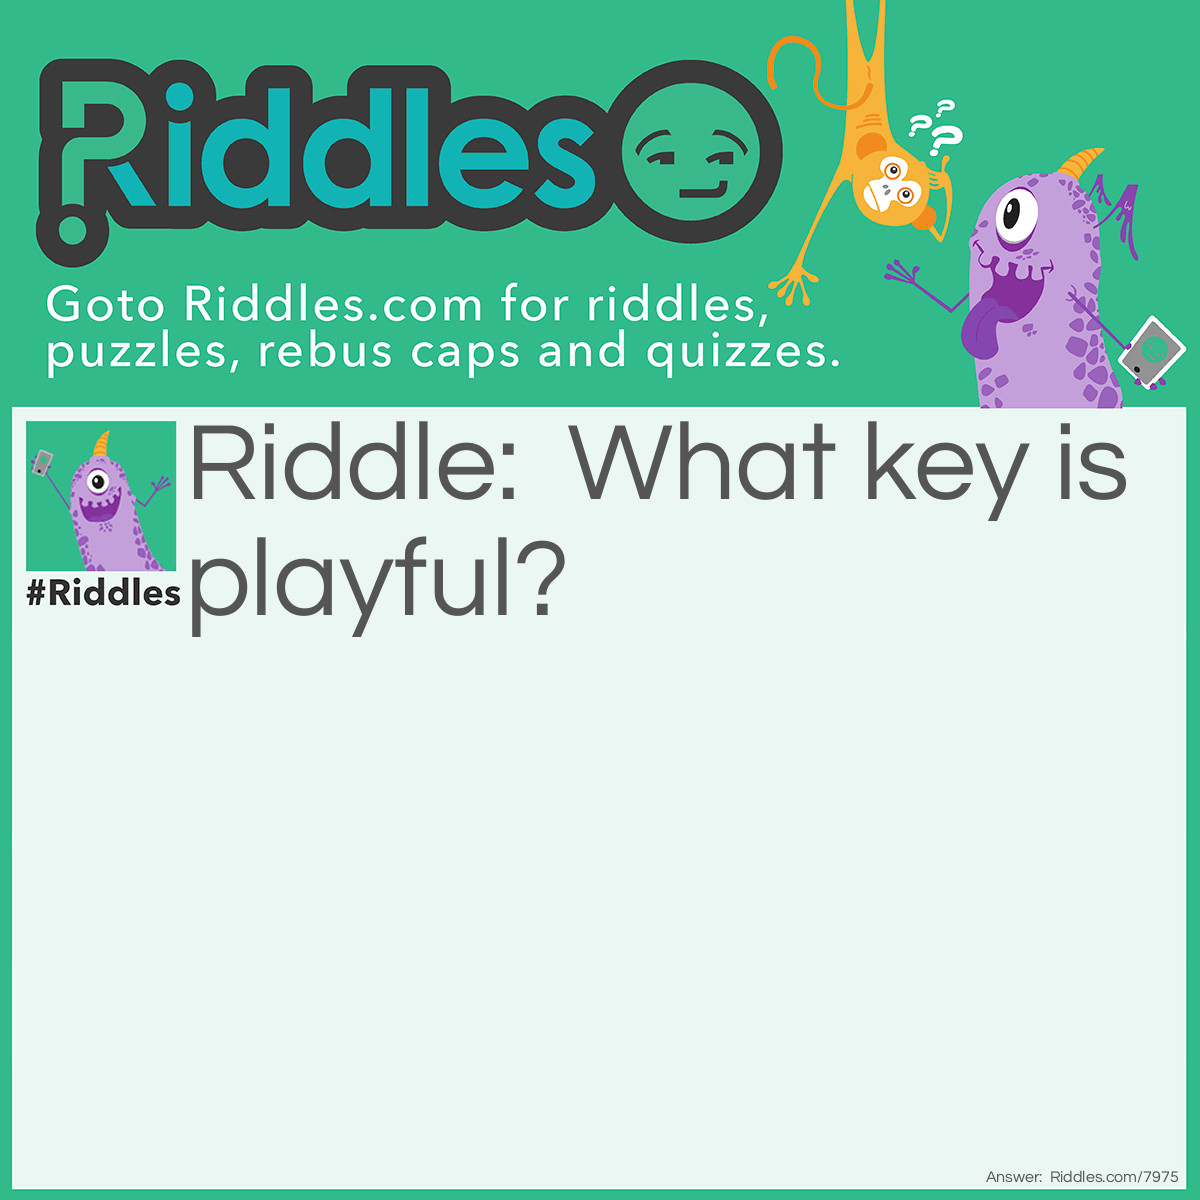 Riddle: What key is playful? Answer: Monkey.